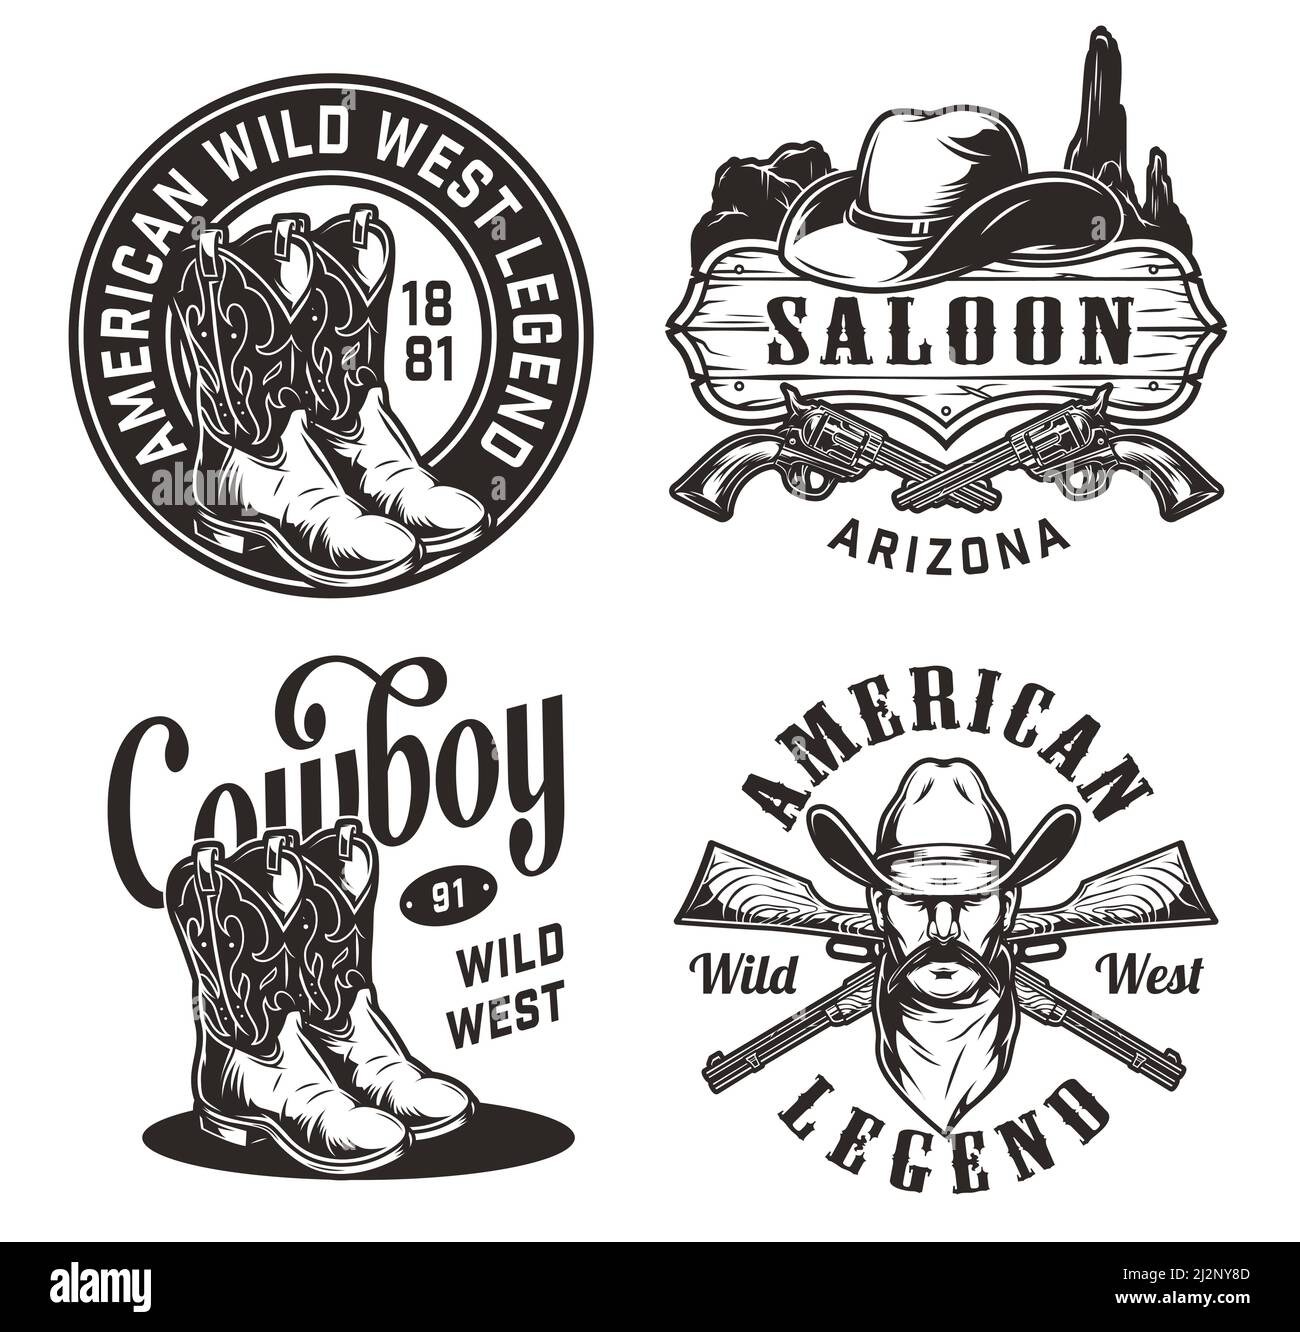 Vintage wild west emblems set with mustached cowboy boots hat on saloon signboard crossed guns desert hills landscape isolated vector illustration Stock Vector